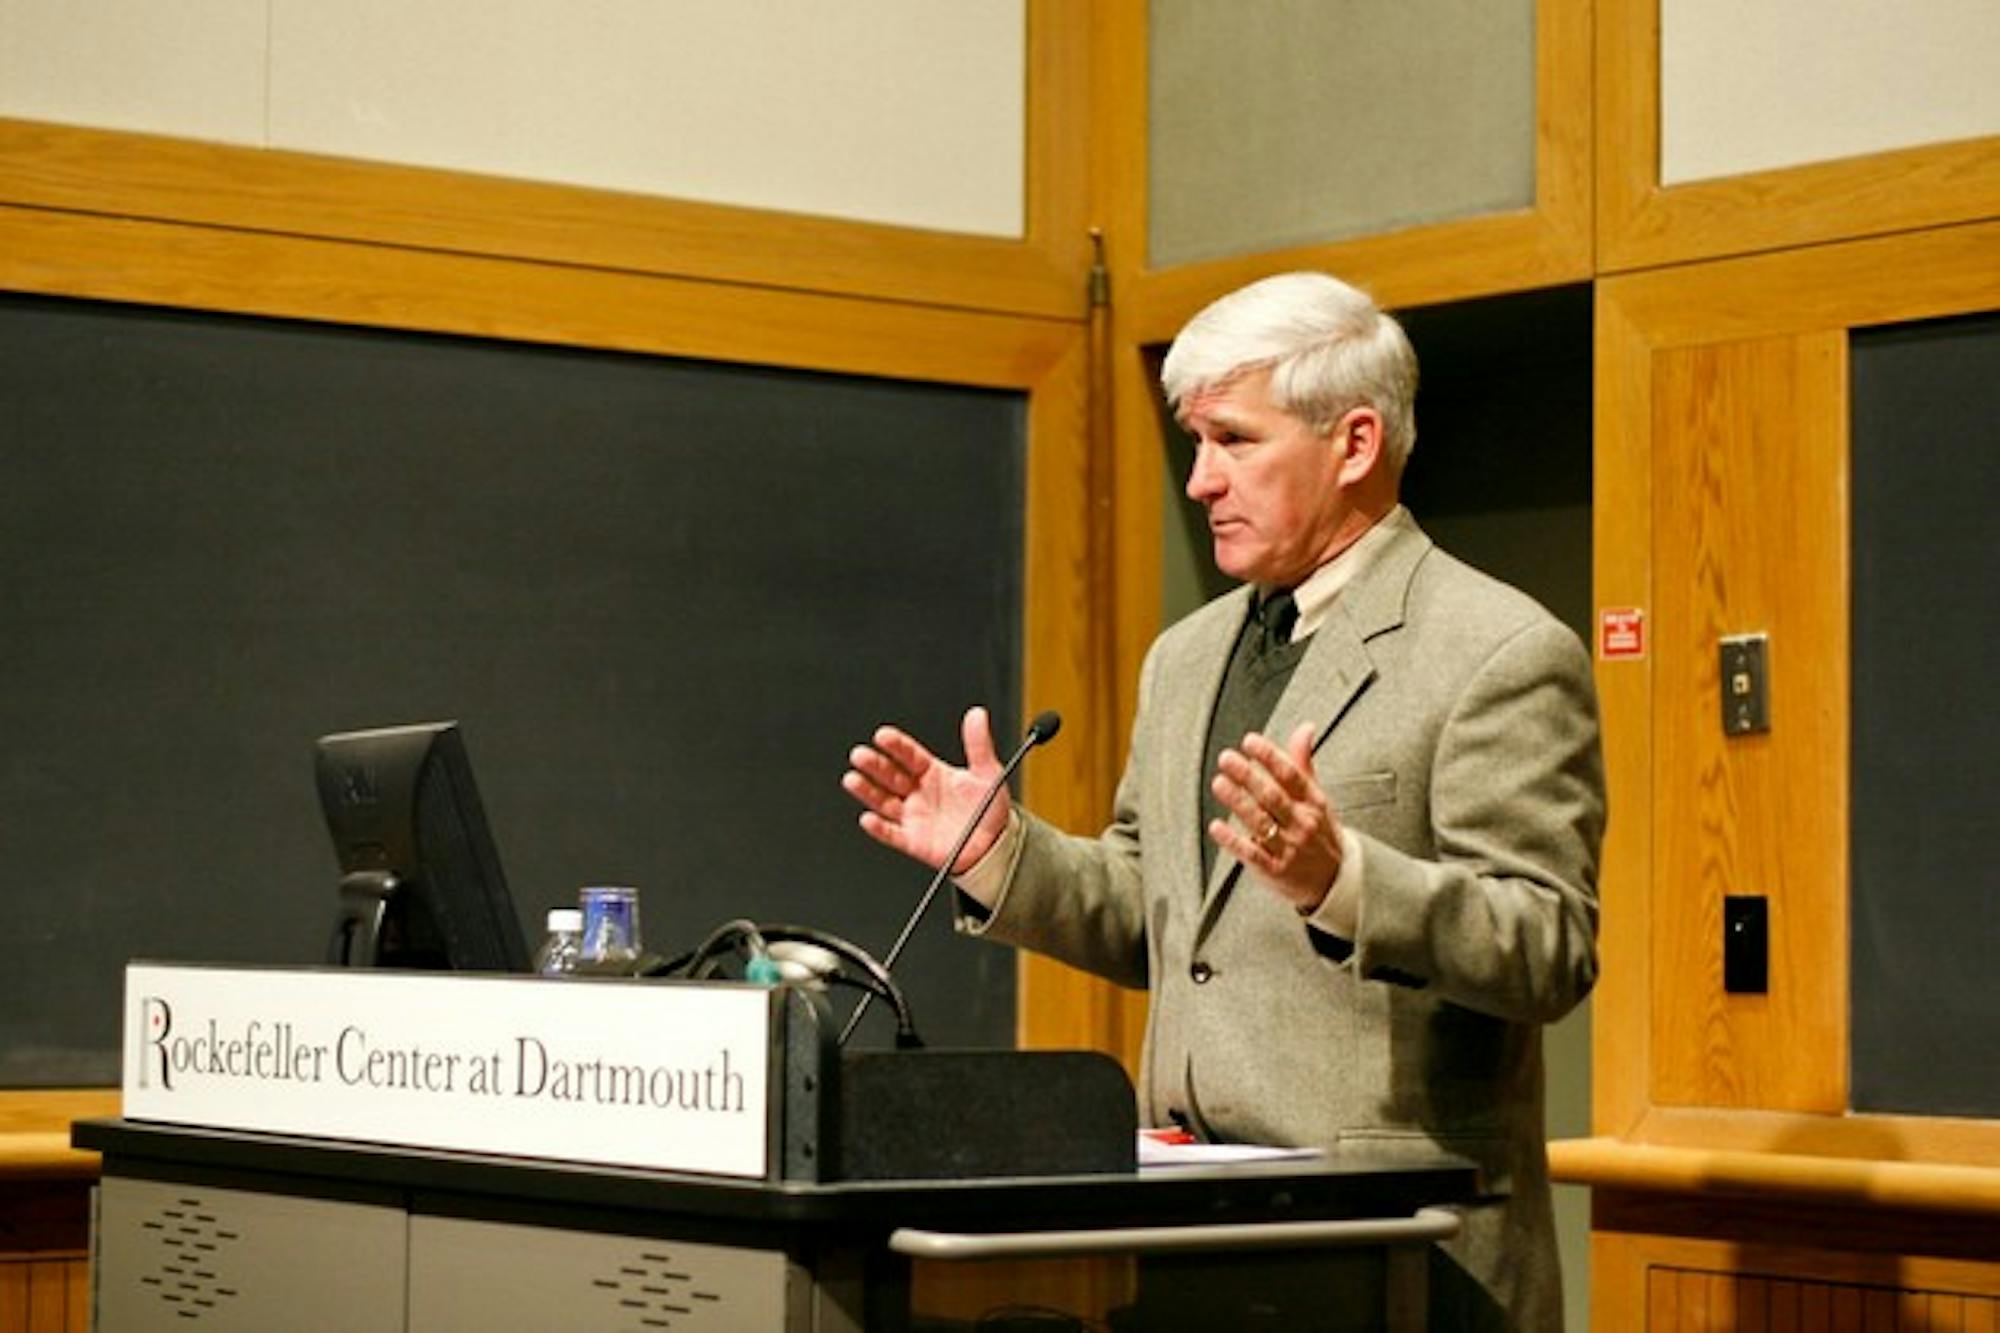 Boston University professor Andrew Bacevich argued that United States foreign policy is defined by expansionism in a Thursday lecture at the College.